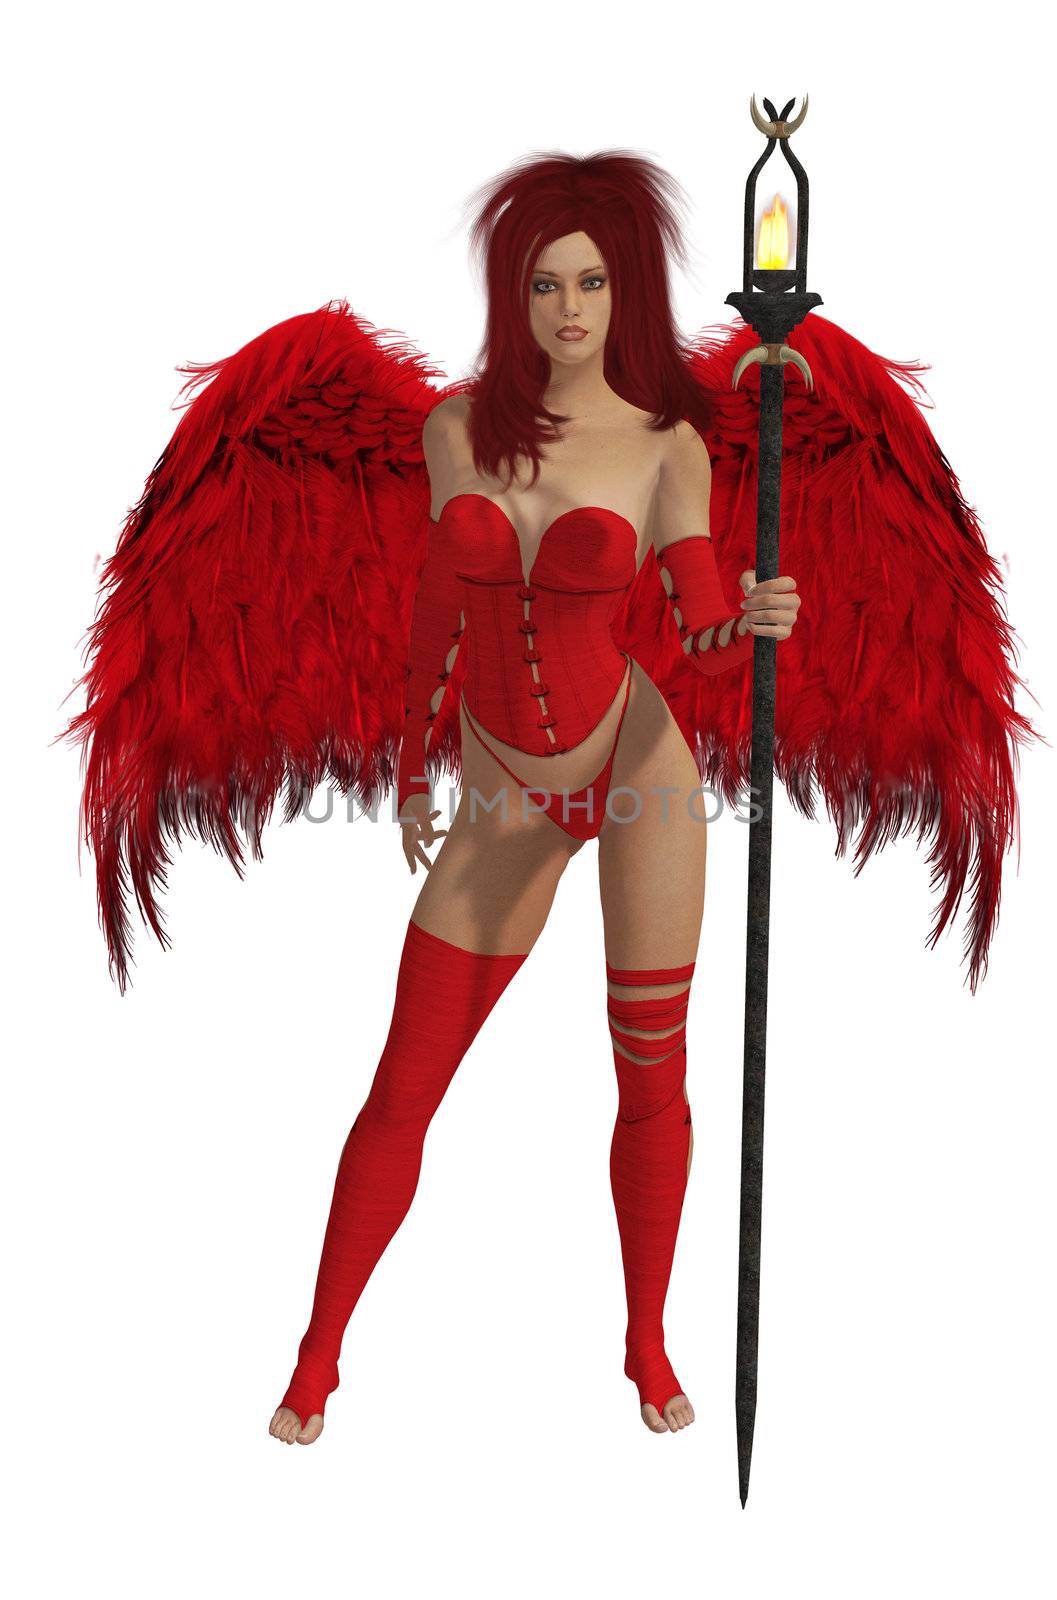 Red Winged Angel With Red Hair by kathygold